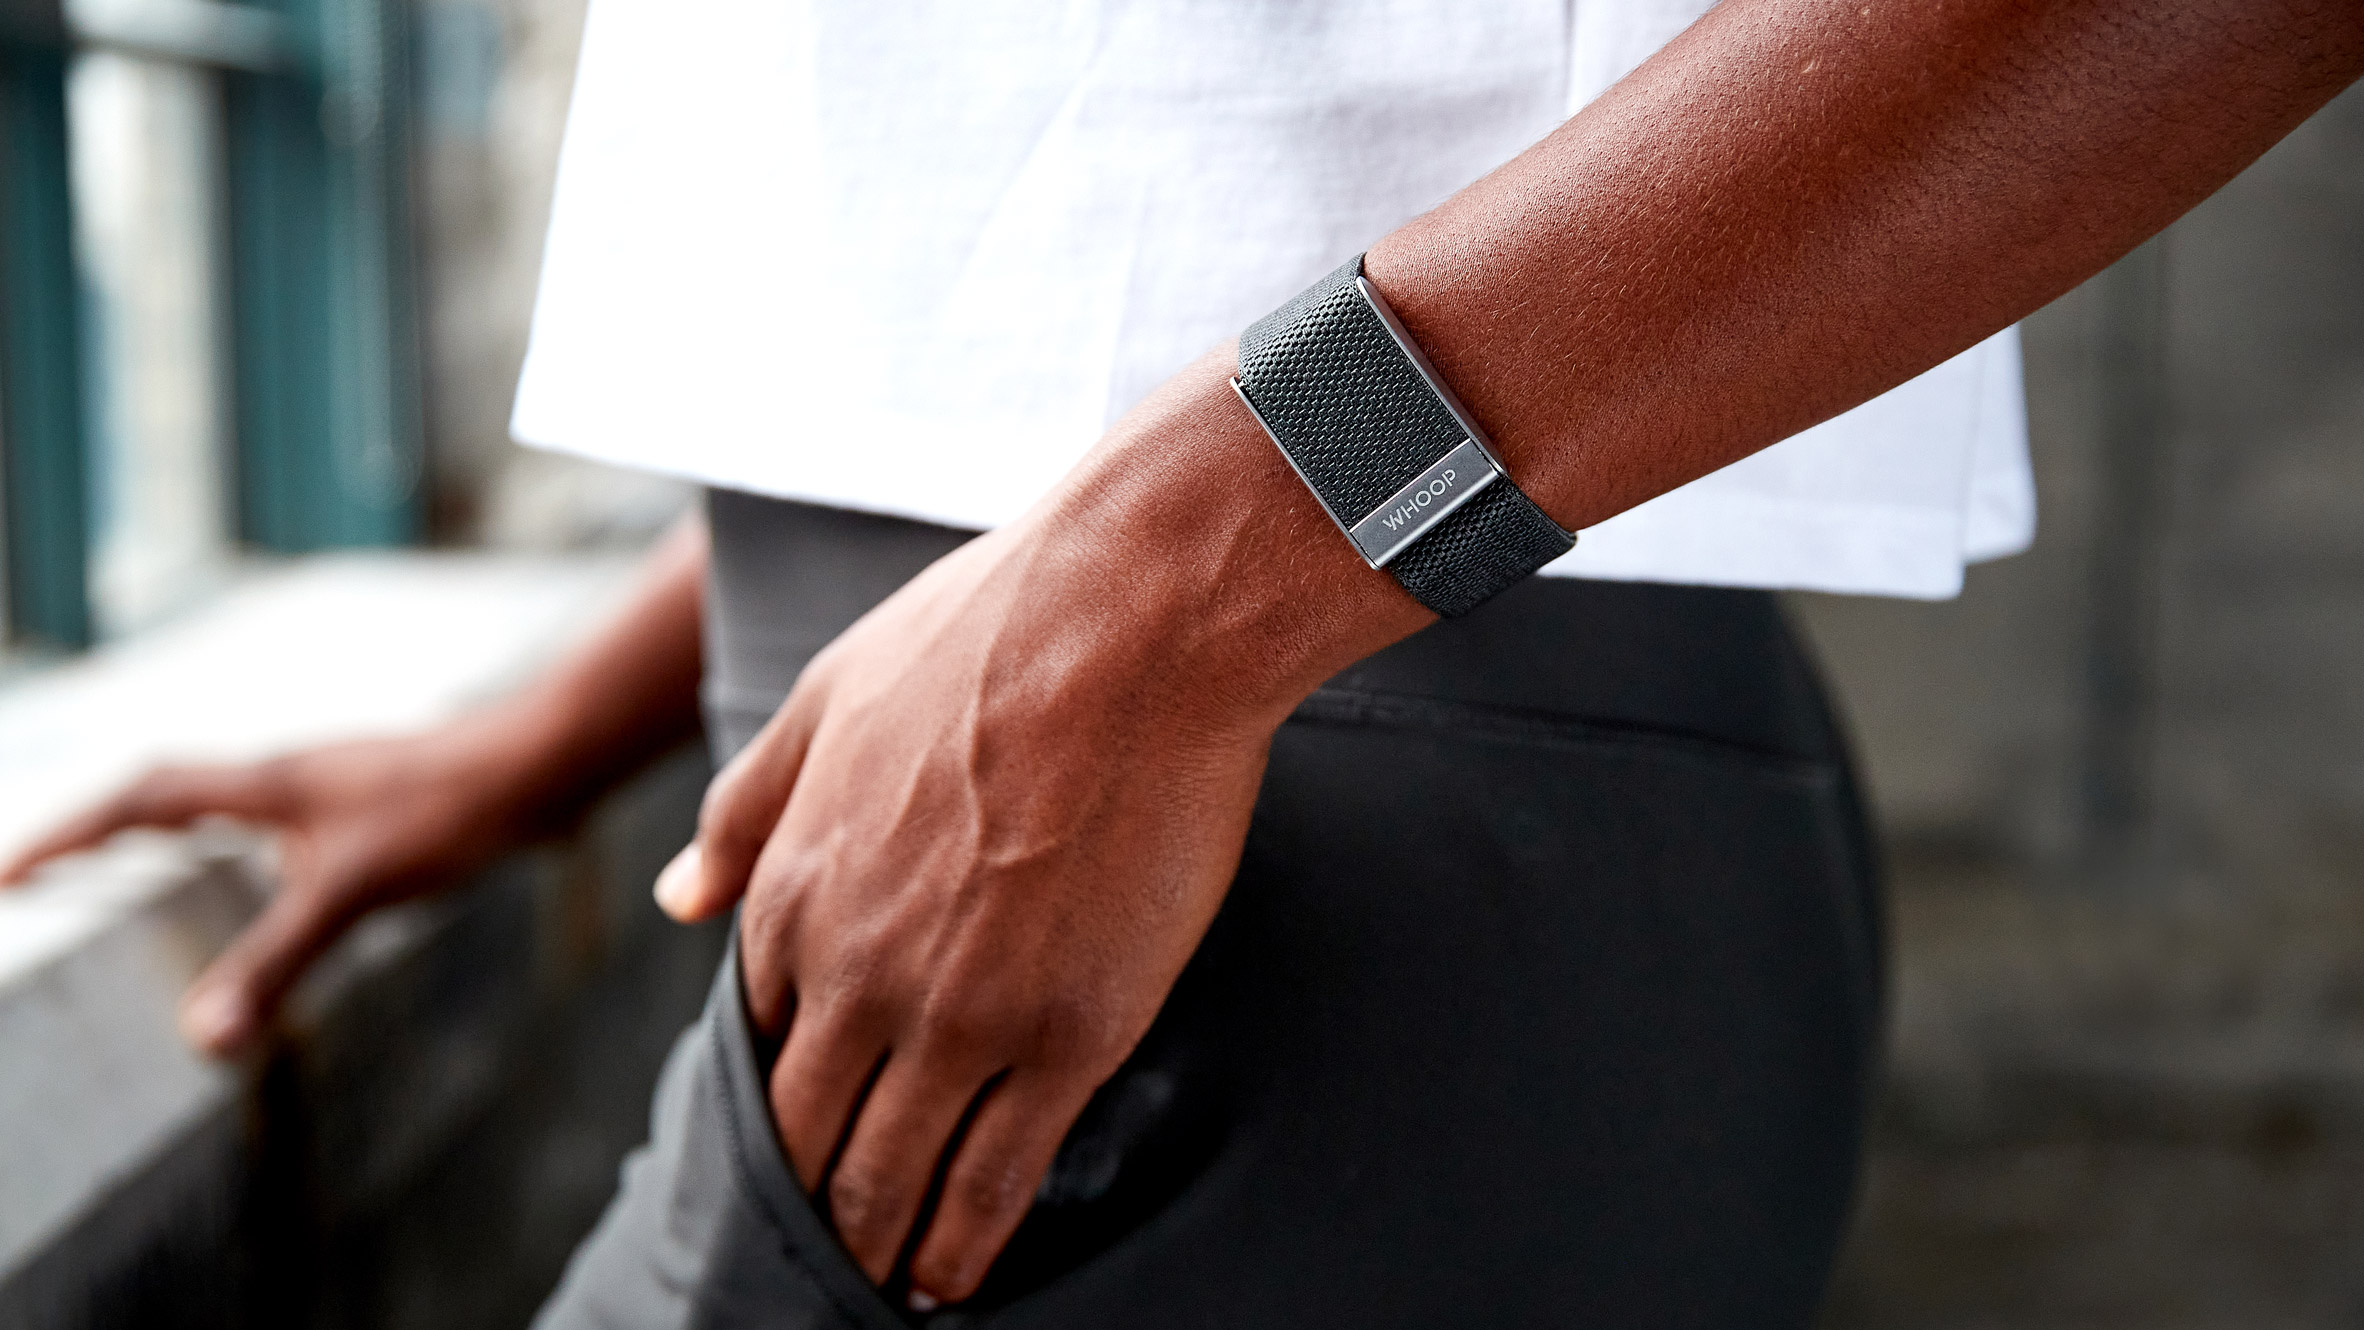 Aruliden designs wearable fitness tracker that can worn "at all times"